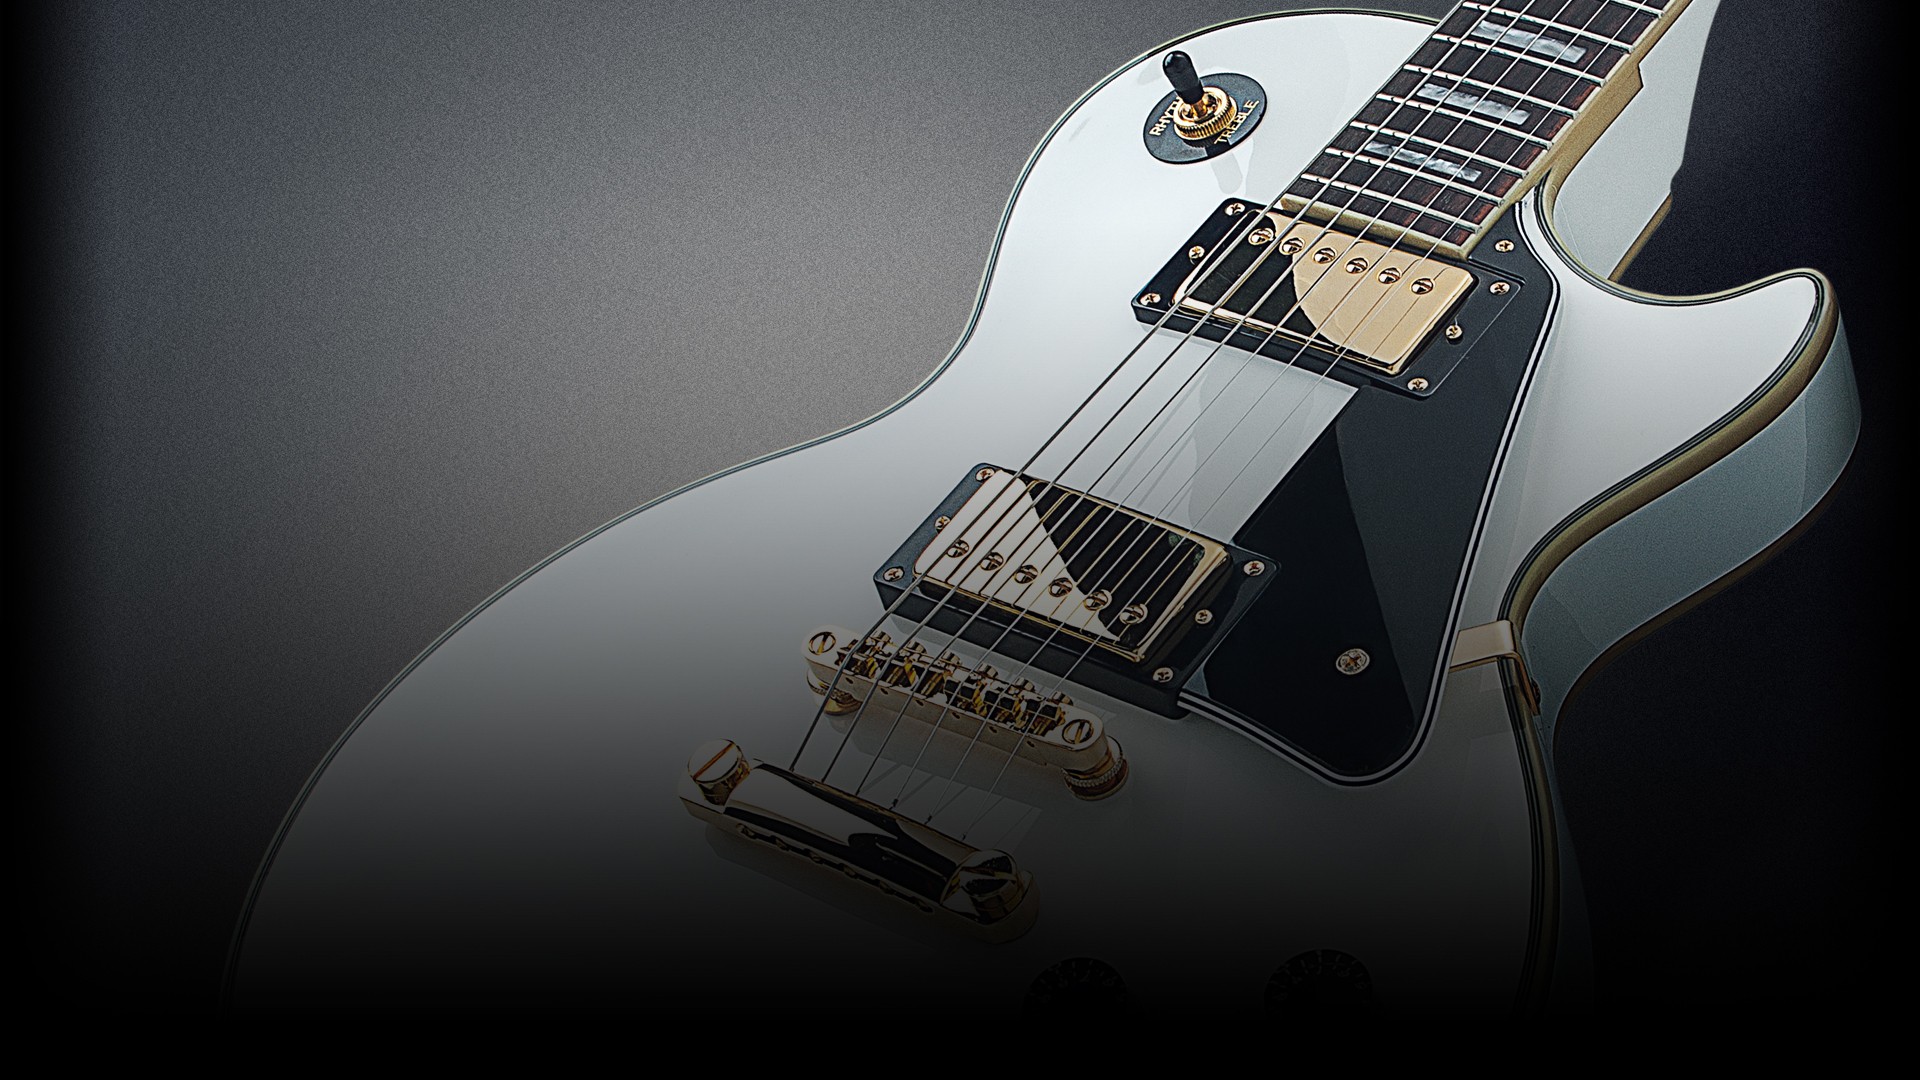 General 1920x1080 guitar music white gold Gibson Les Paul Gibson musical instrument simple background closeup